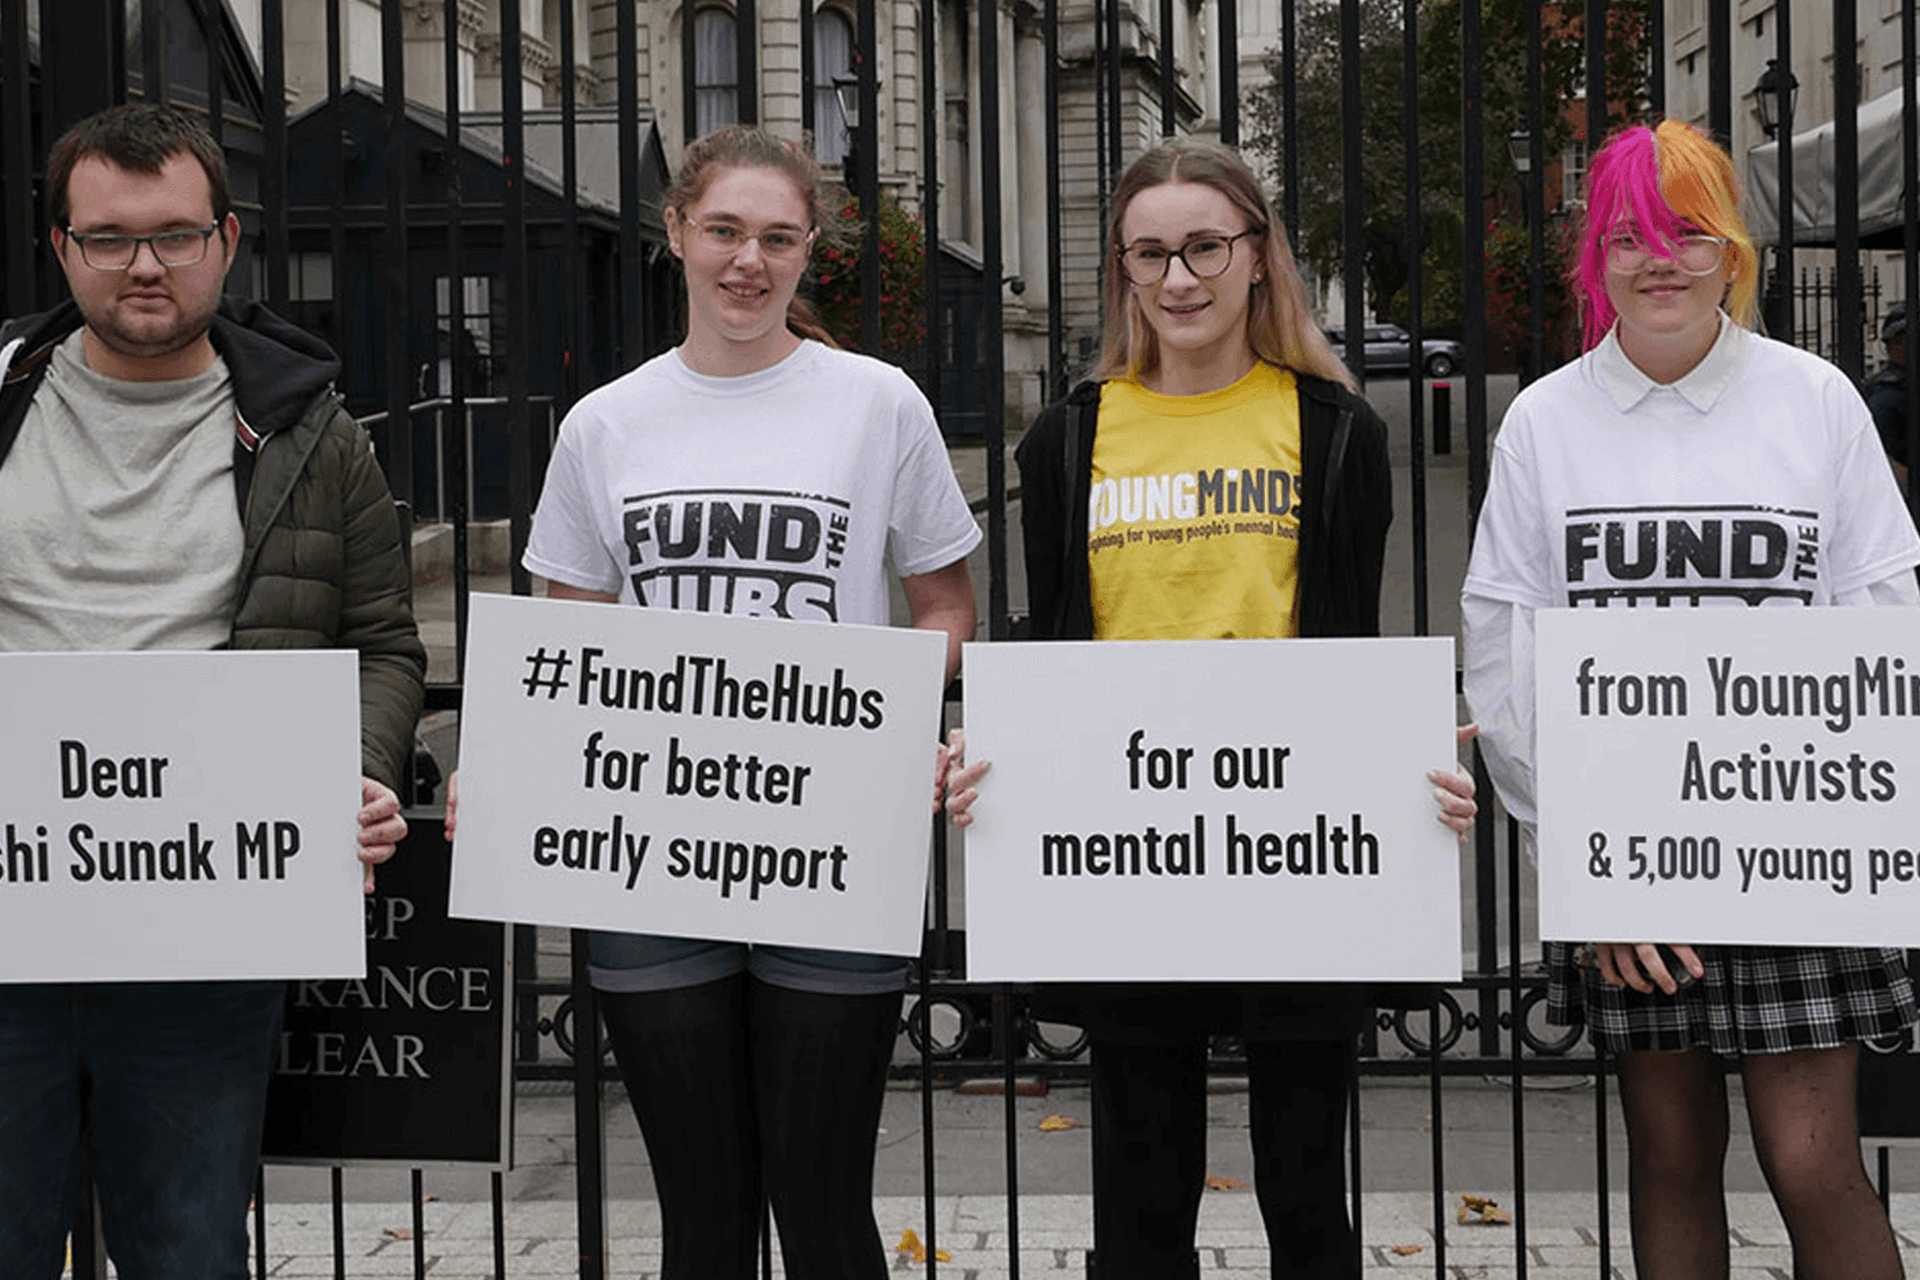 Four YoungMinds Activists at Downing Street holding placards calling for Rishi Sunak MP to Fund The Hubs